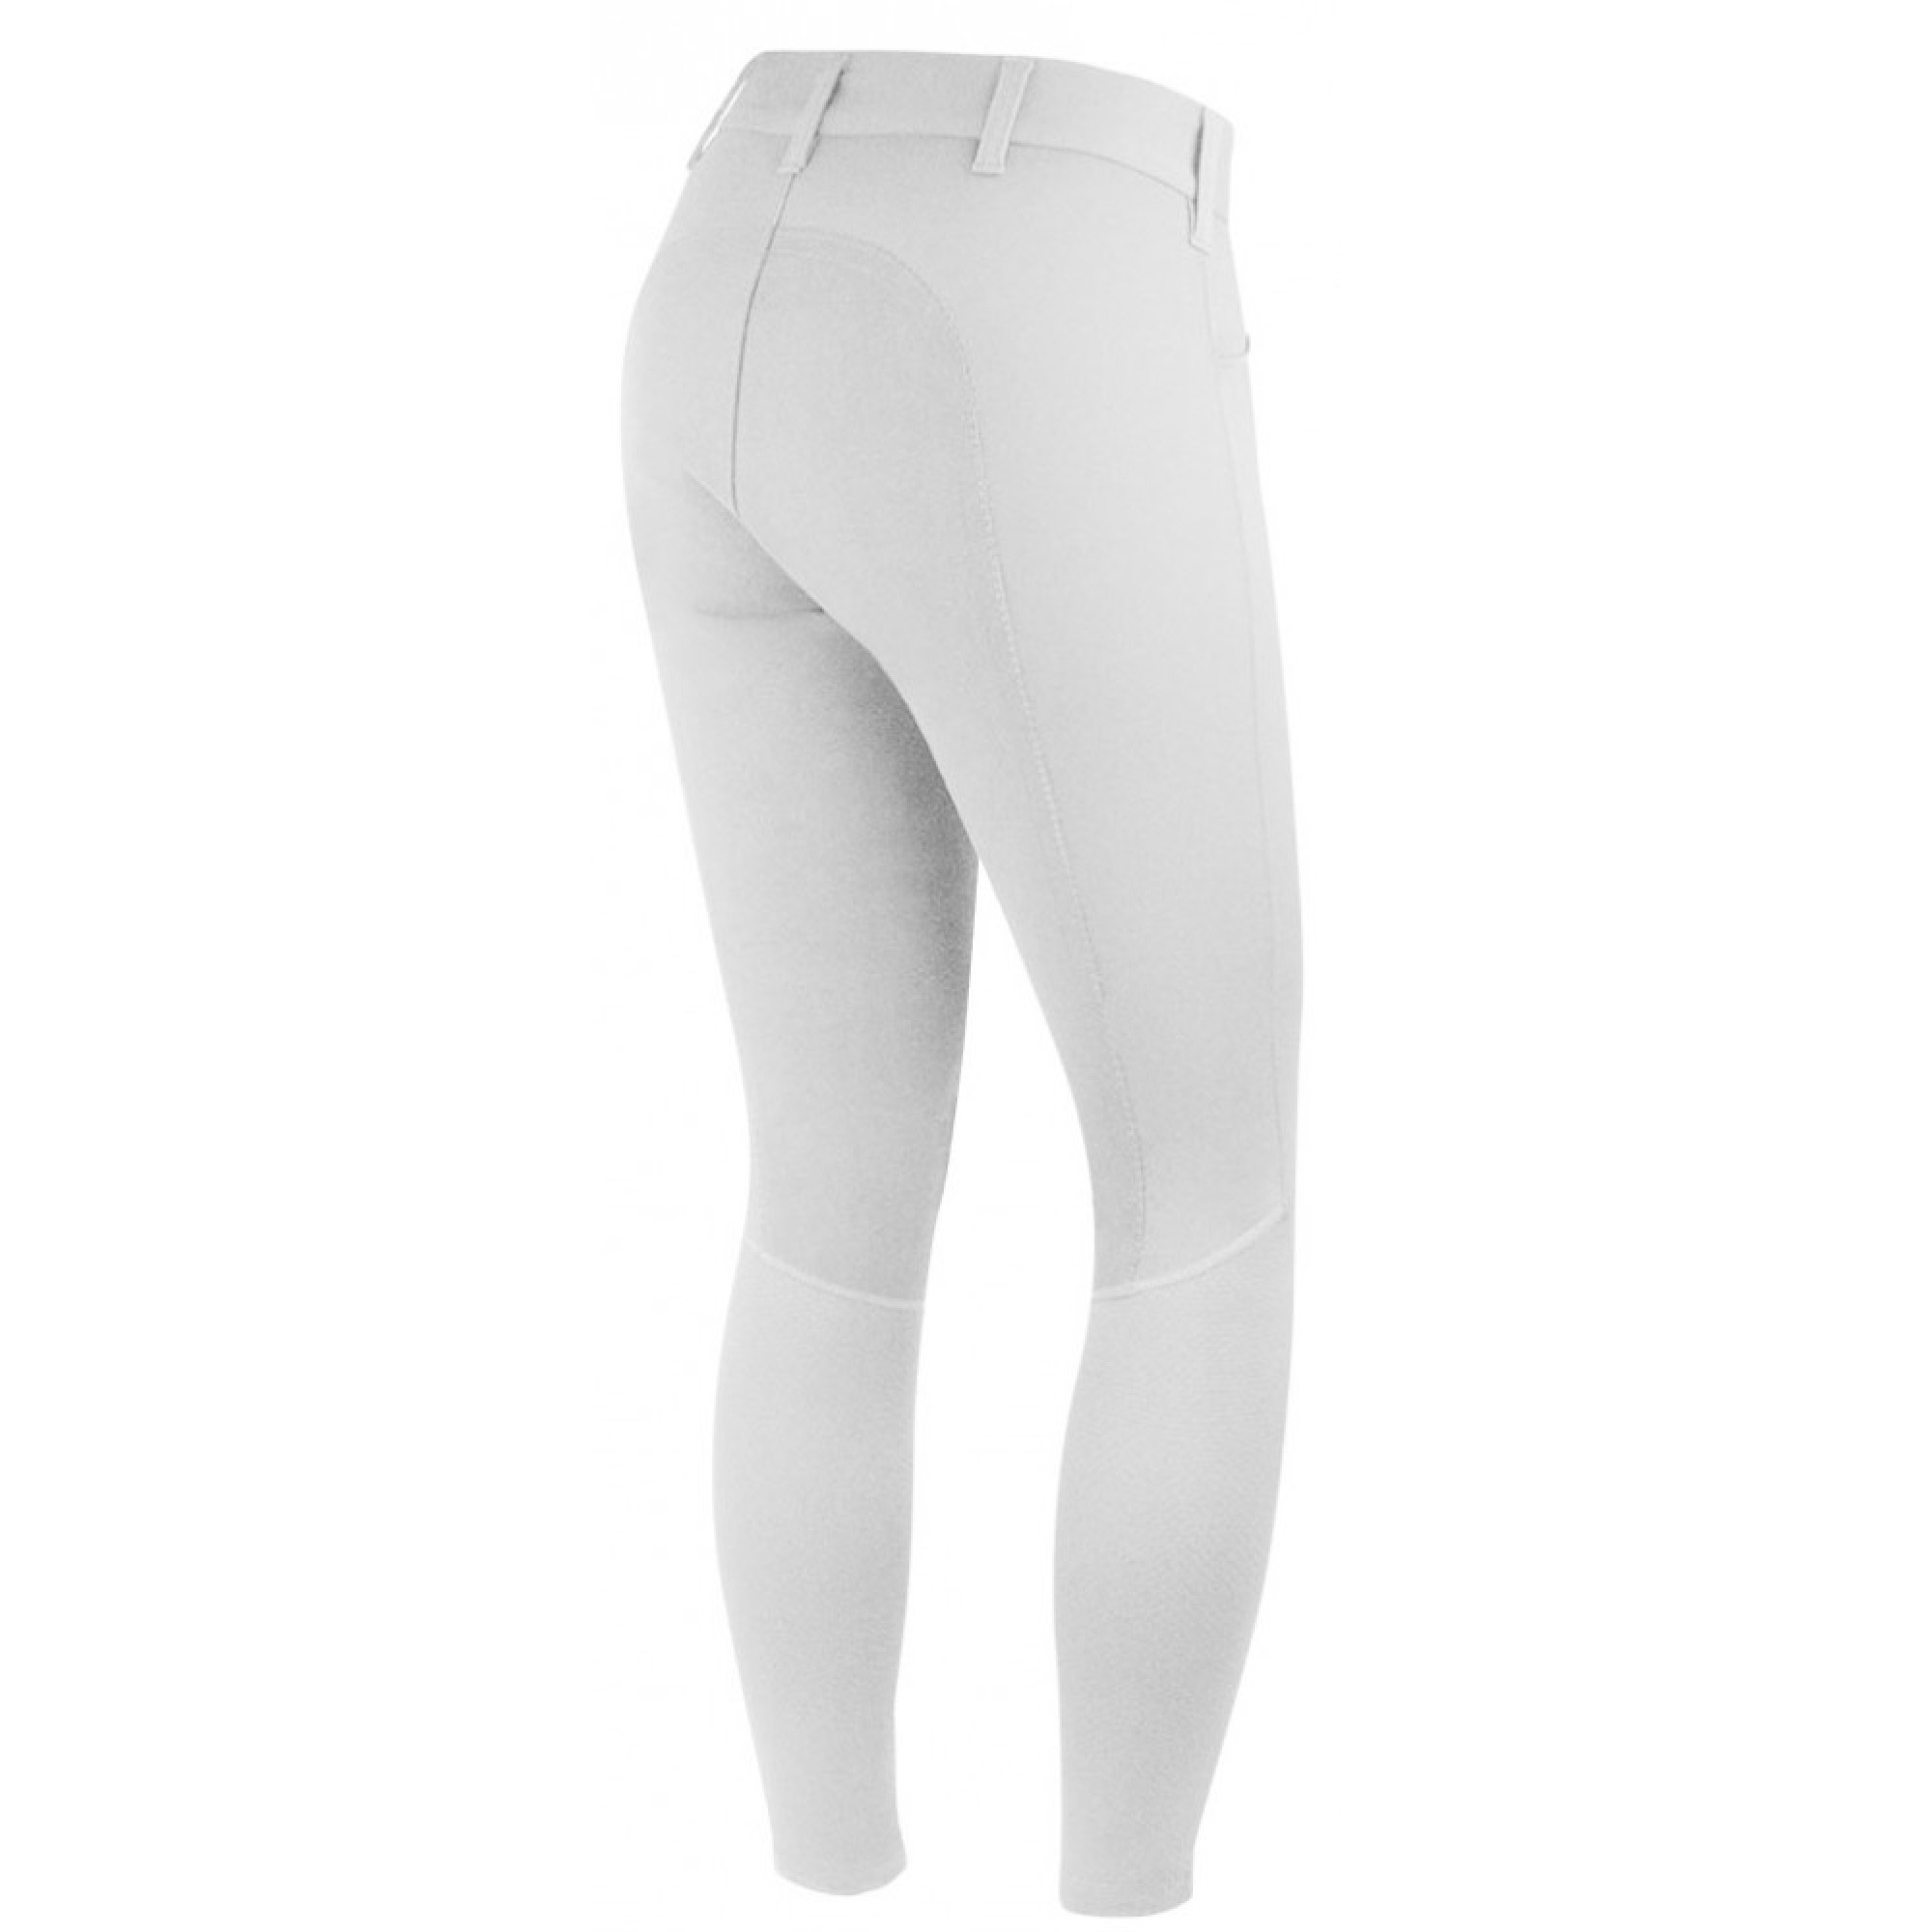 IRIDEON® Hampshire competition breeches, size 34"